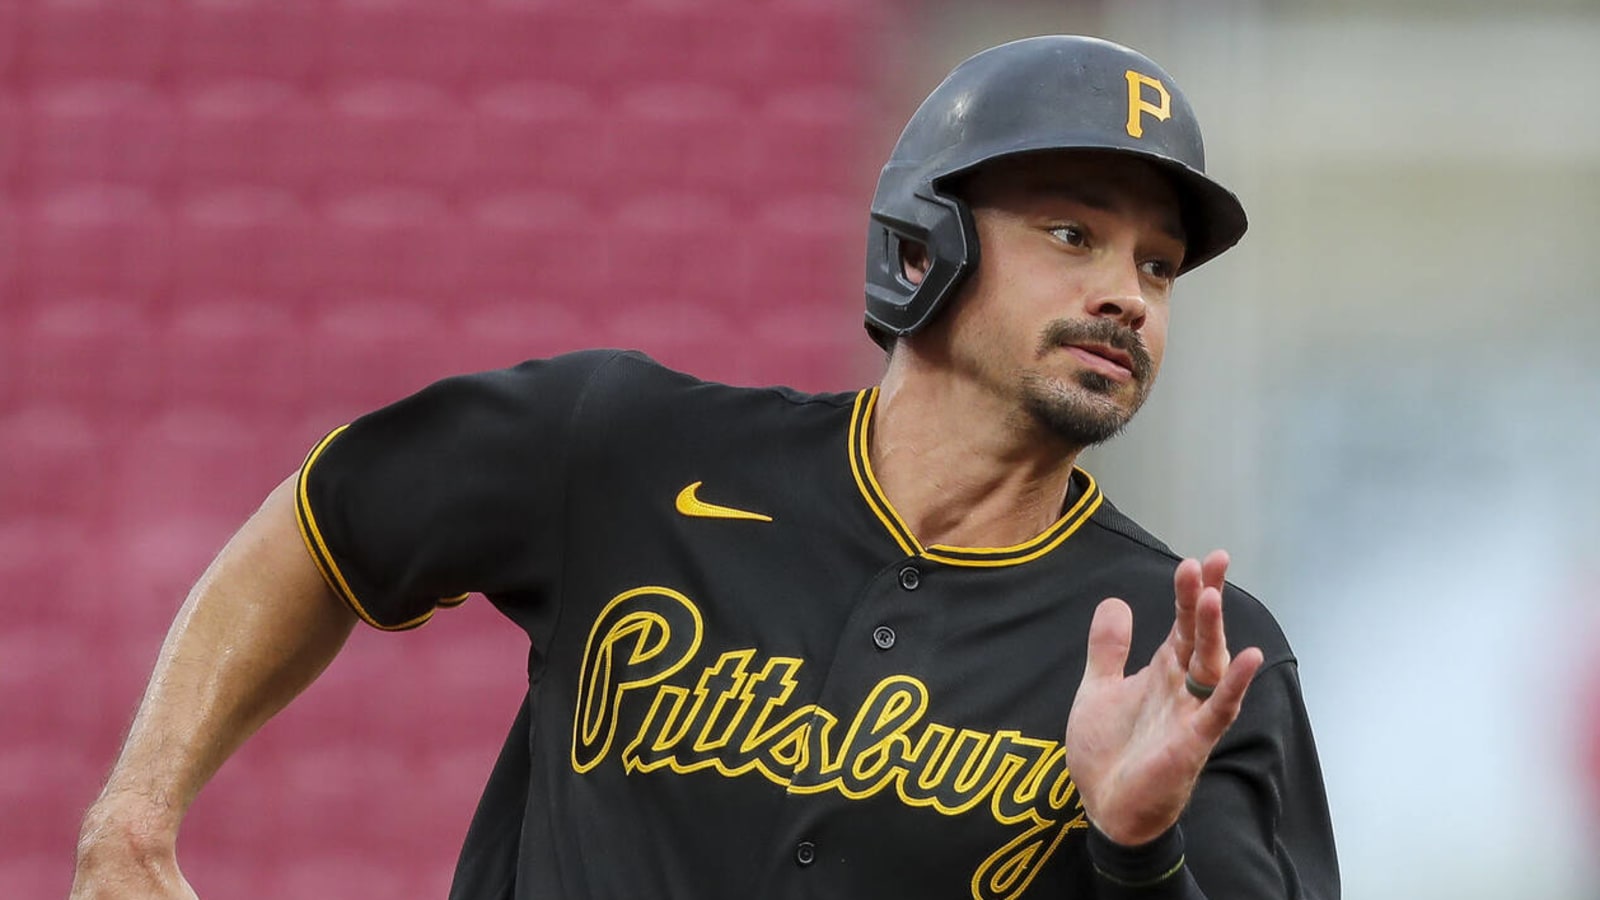 Report: Pirates unlikely to trade All-Star outfielder Bryan Reynolds